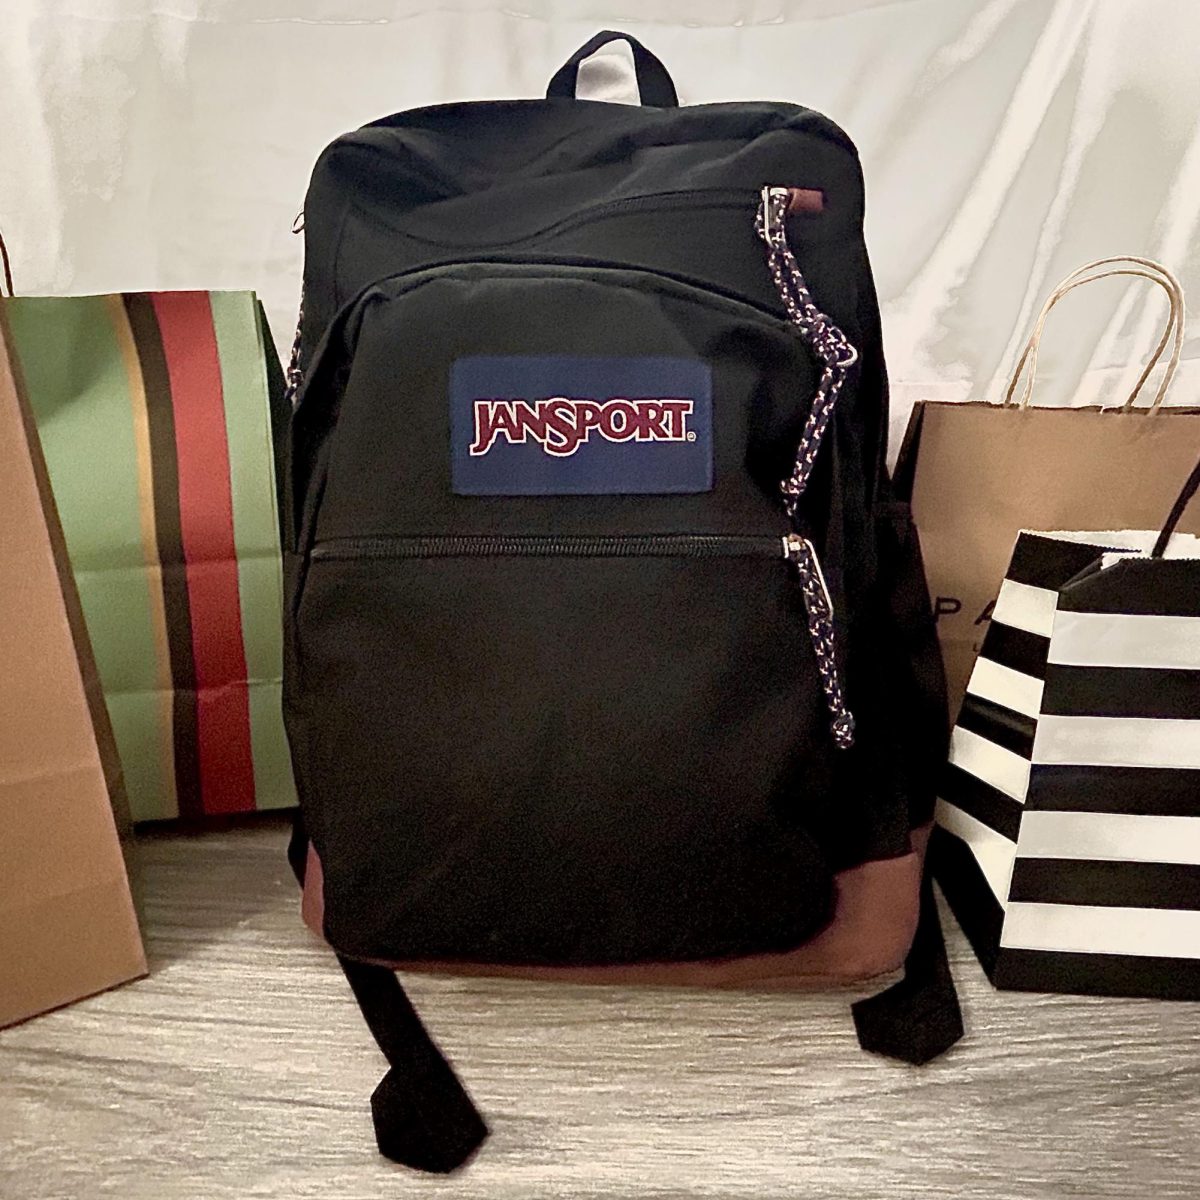 A+backpack+surrounded+by+shopping+bags%2C+showing+limited+space.+